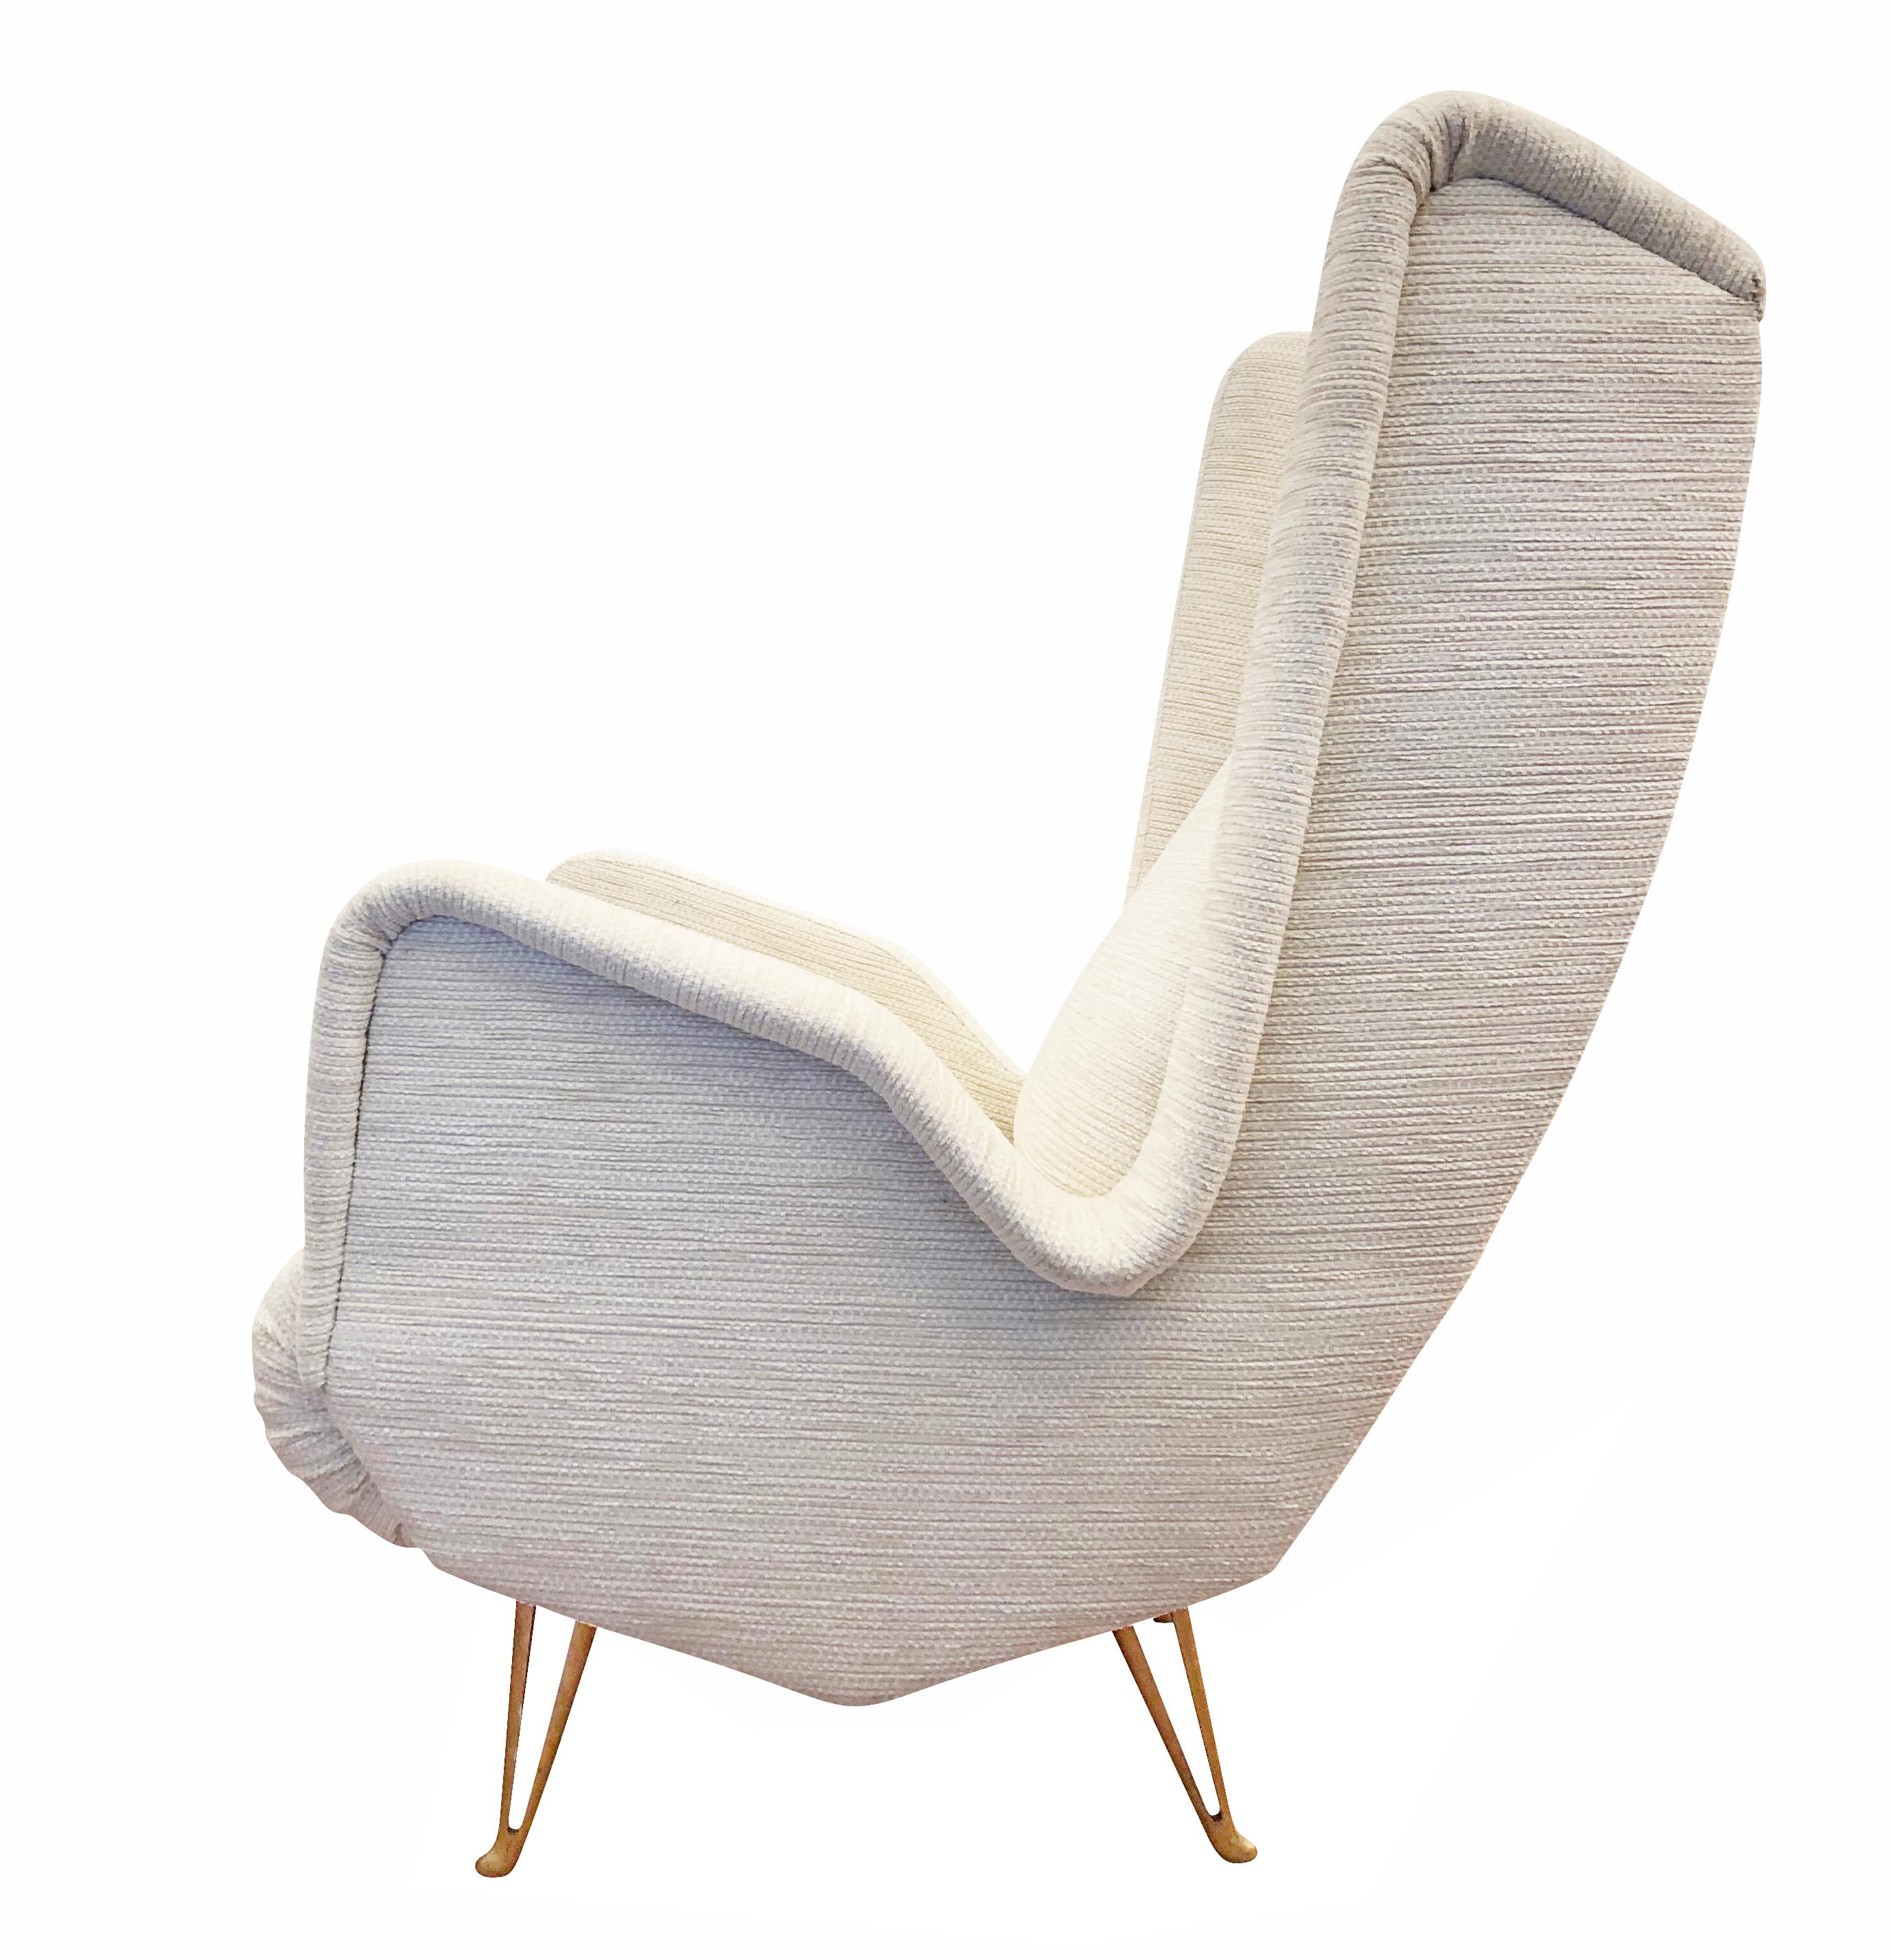 Large midcentury lounge chair manufactured by ISA Bergamo with wings and unusually contoured sides. The legs are gold lacquered aluminium. Re-upholstered in an off-white fabric. 

Condition: Recently re-recovered. Legs are in original vintage